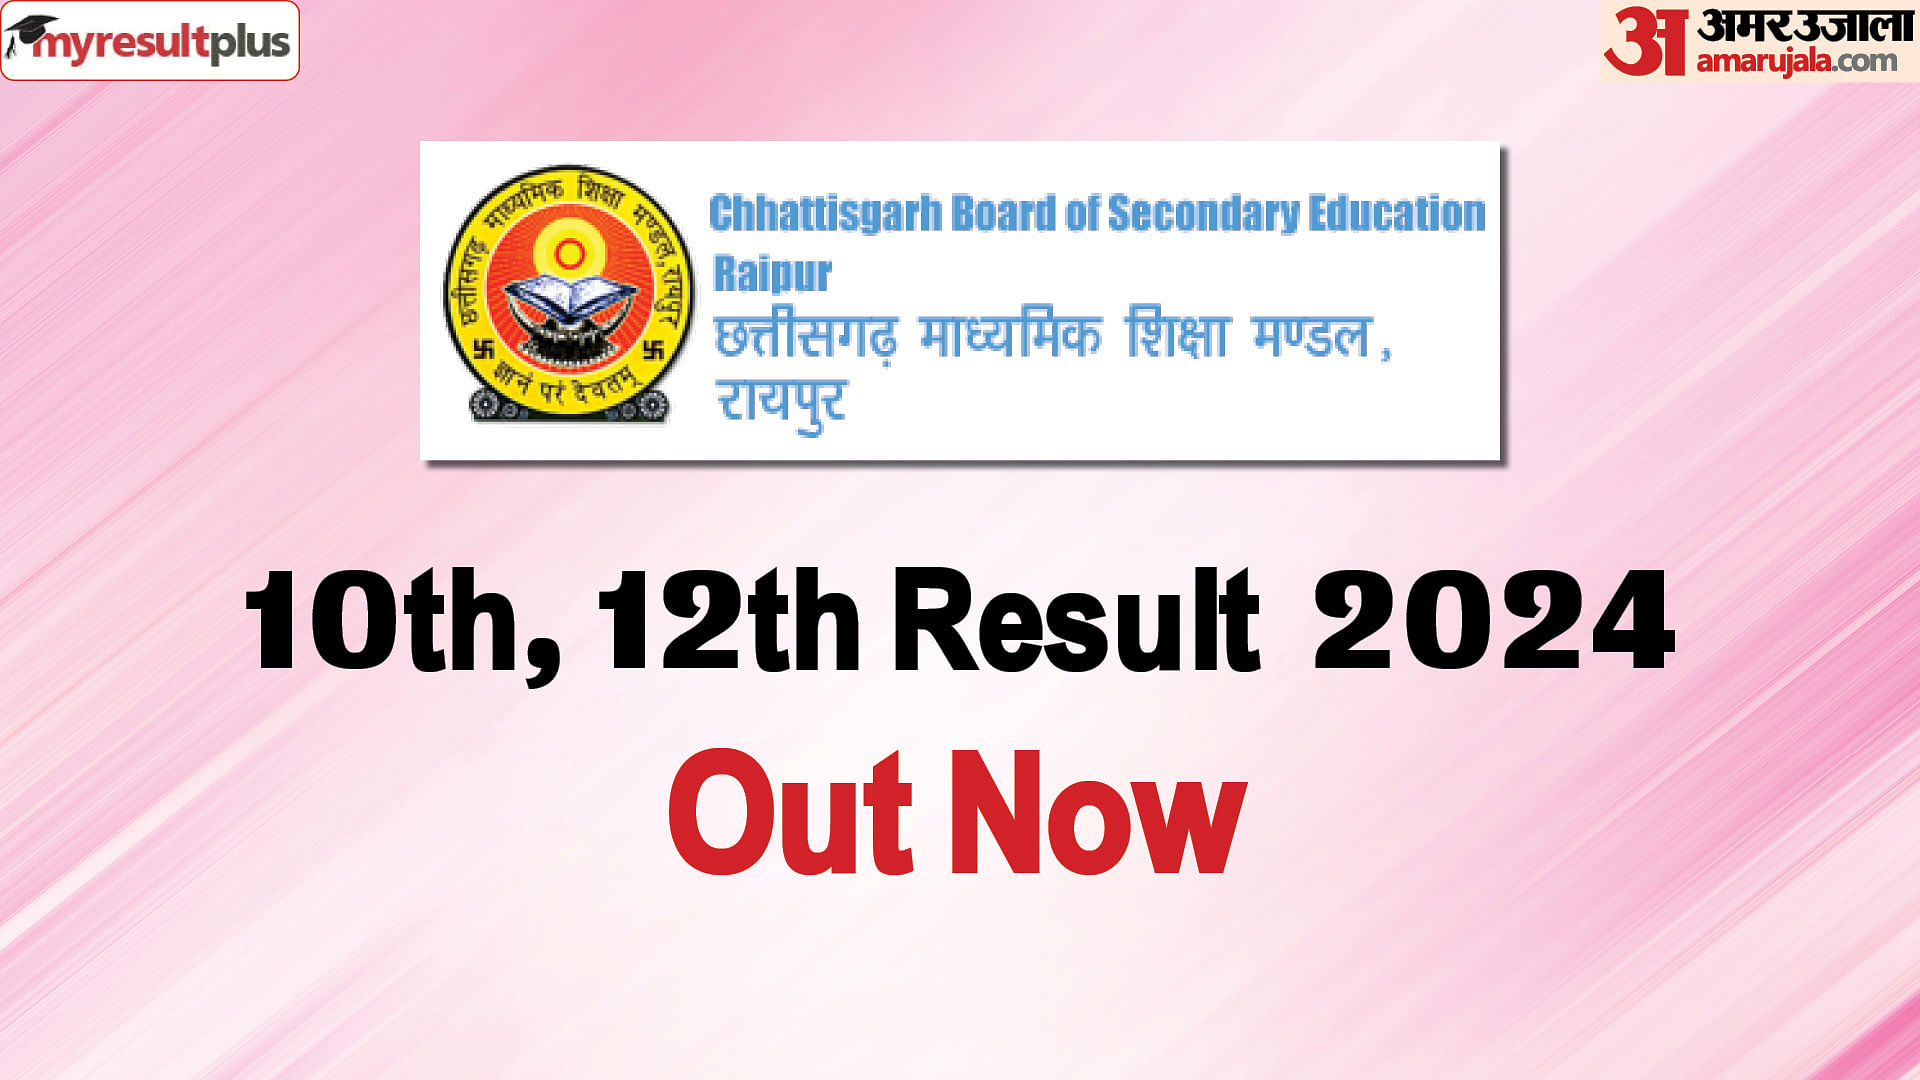 Chhattisgarh Board 10th, 12th Result 2024 out now, Read about the pass percentage and more details here